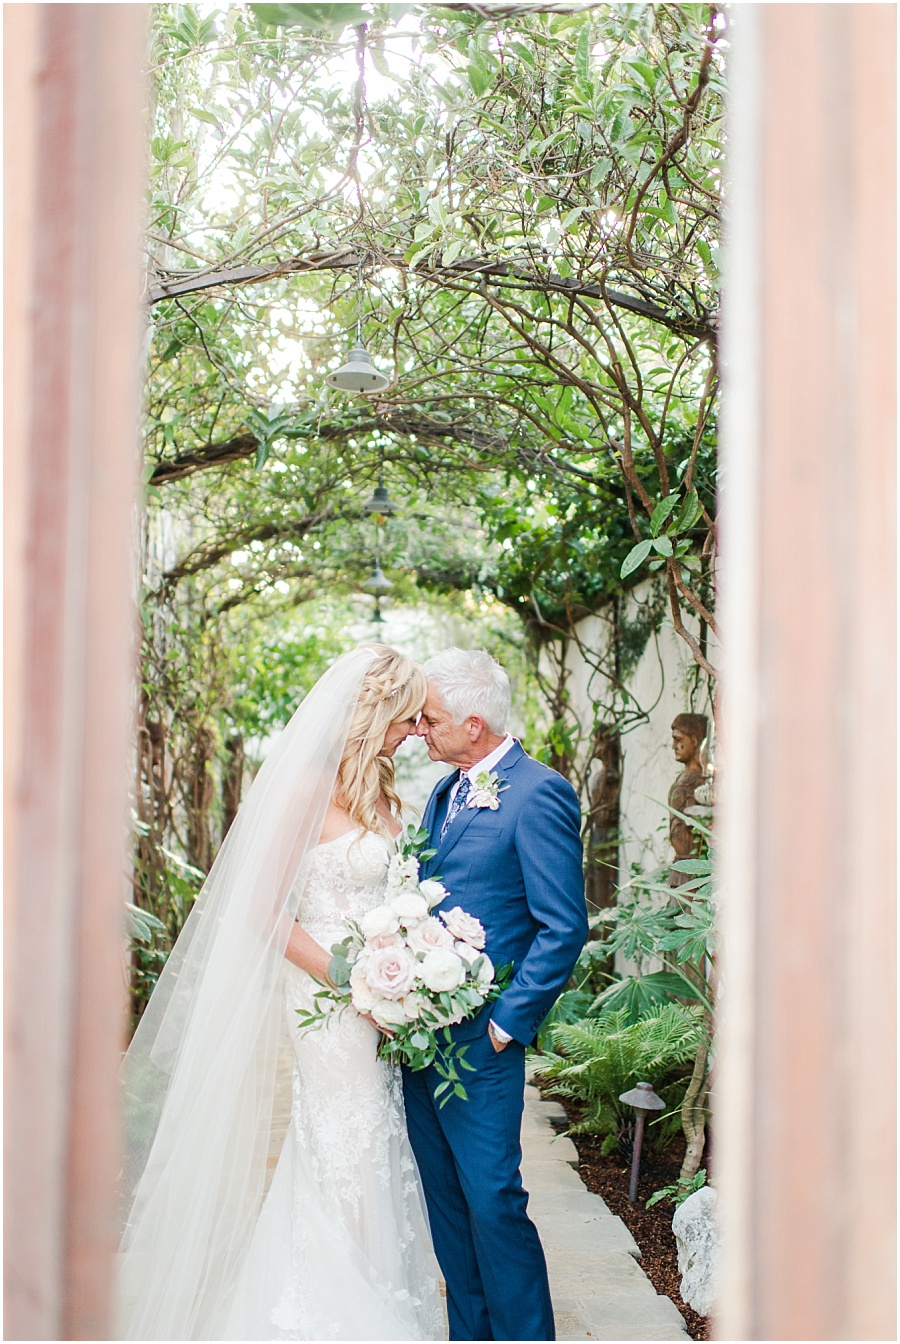 The Villa San Juan Capistrano by Mollie Jane Photography.  To see more go to www.molliejanephotography.com